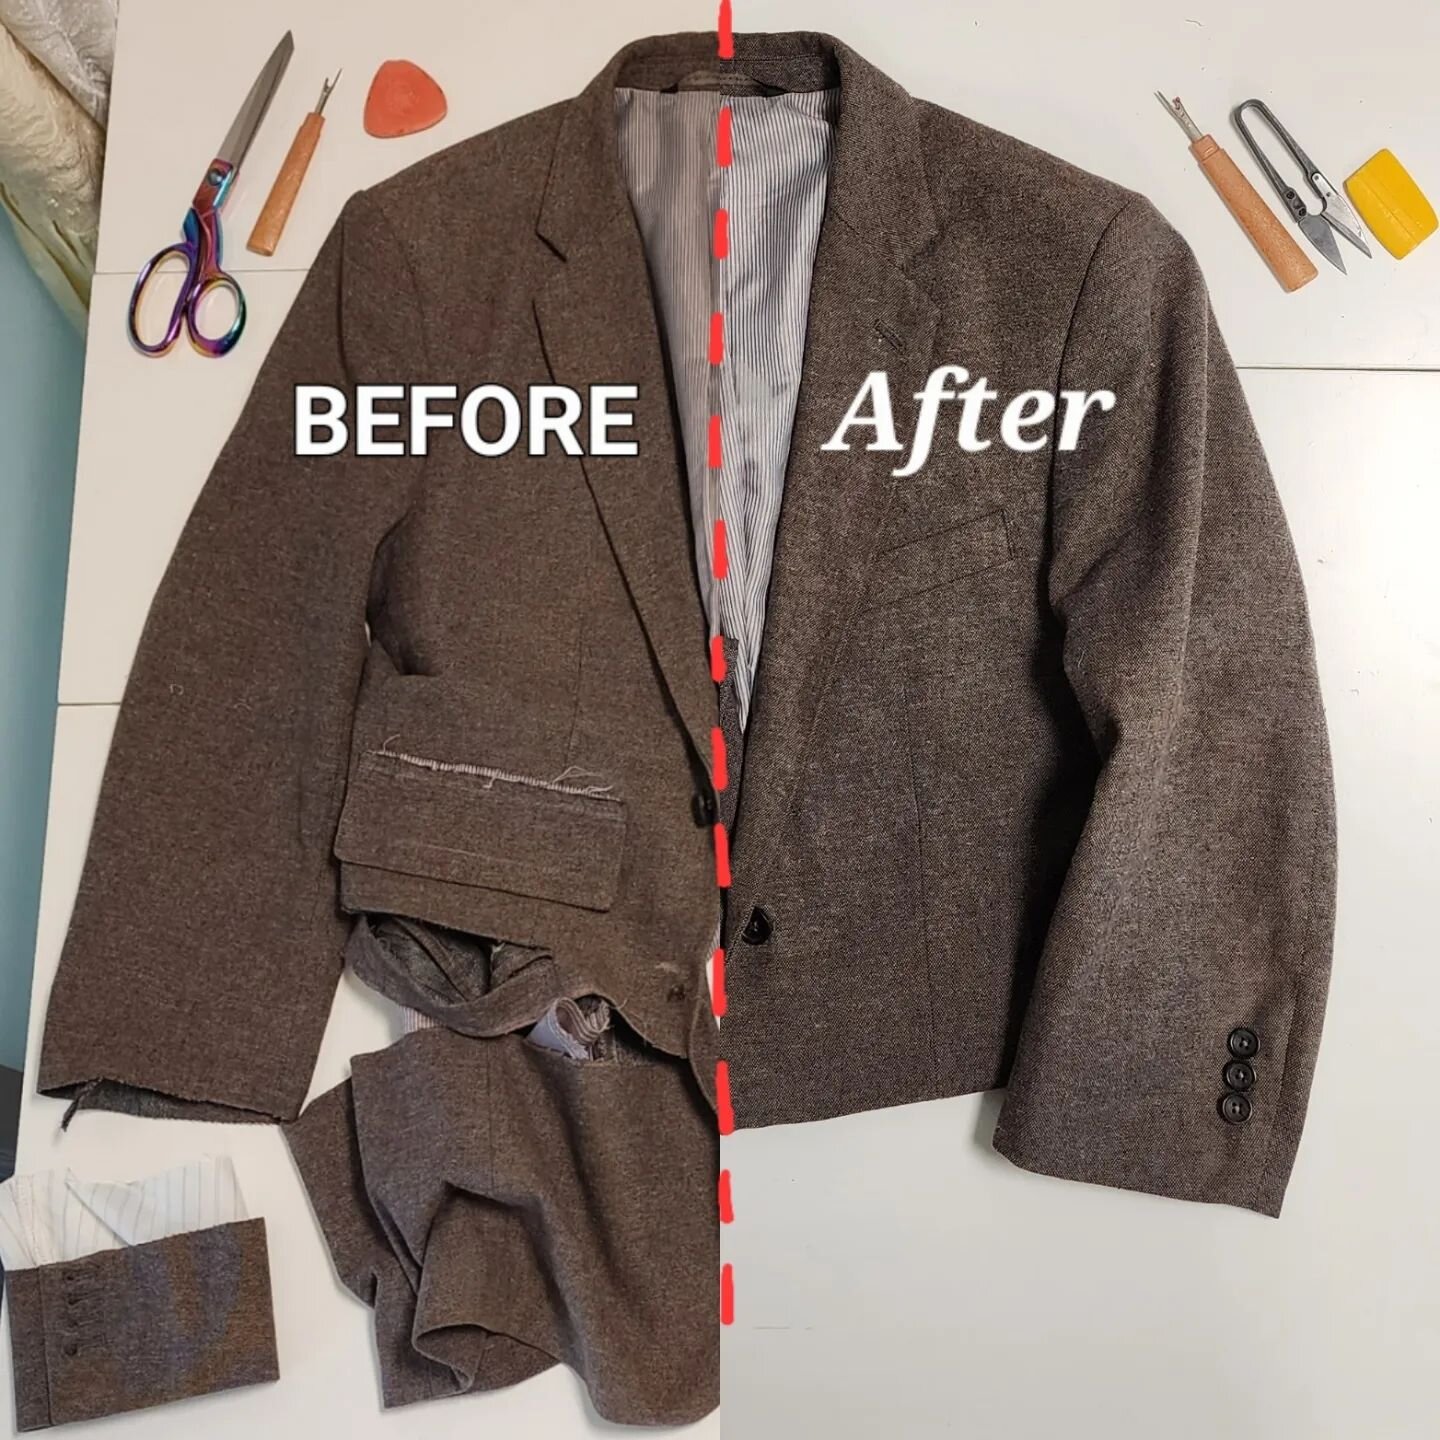 Boyfriend jacket too overbearing? Your boyfriend's weird tailor refuse to fix women's suits?? (I don't know why but some of them operate like old timey barber shops)

Let's make it into something you'll actually wear.

#localtailor #womenfashion #upc